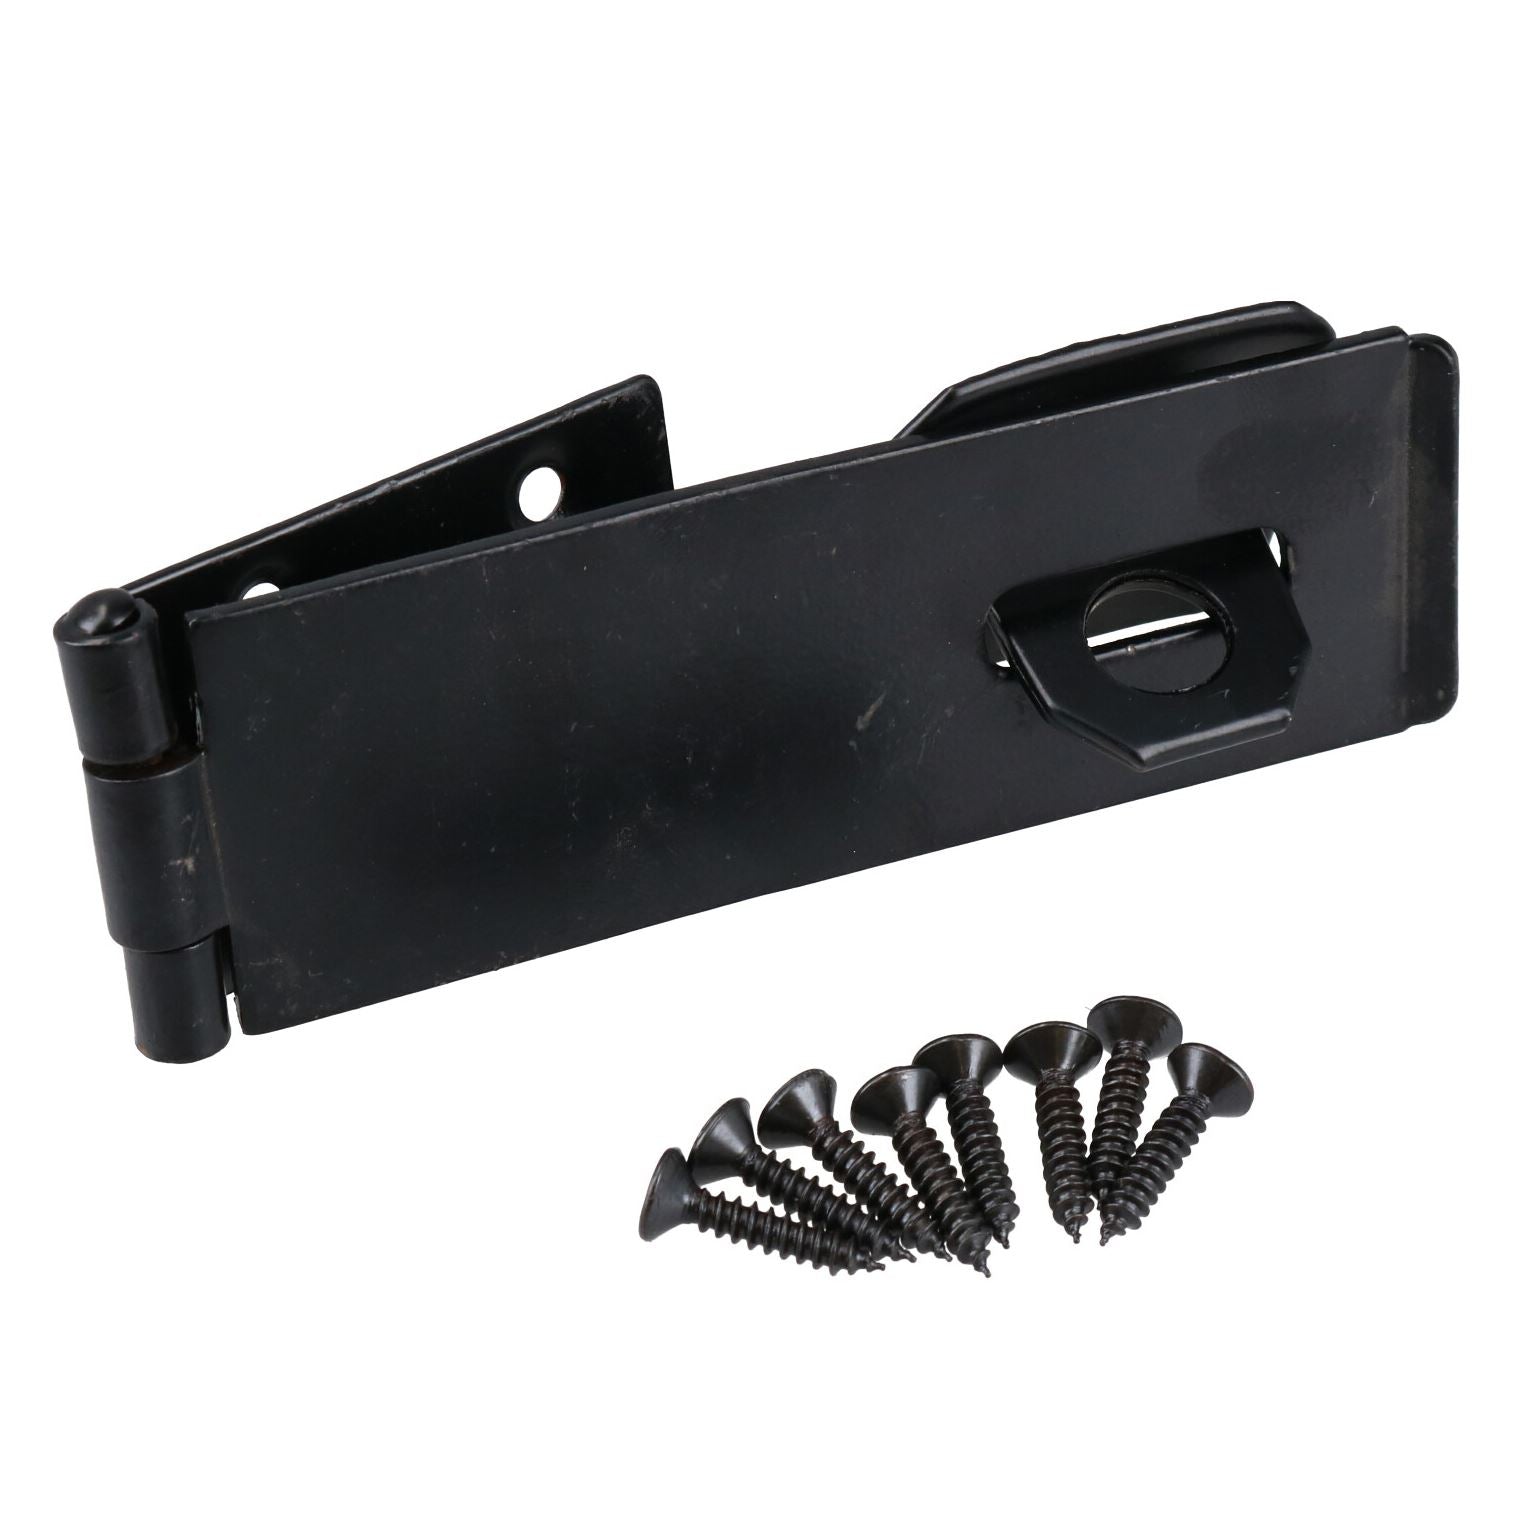 4" x 1.5" (102 x 38mm) Hasp And Staple Security Garage Shed Gate Door Latch Lock